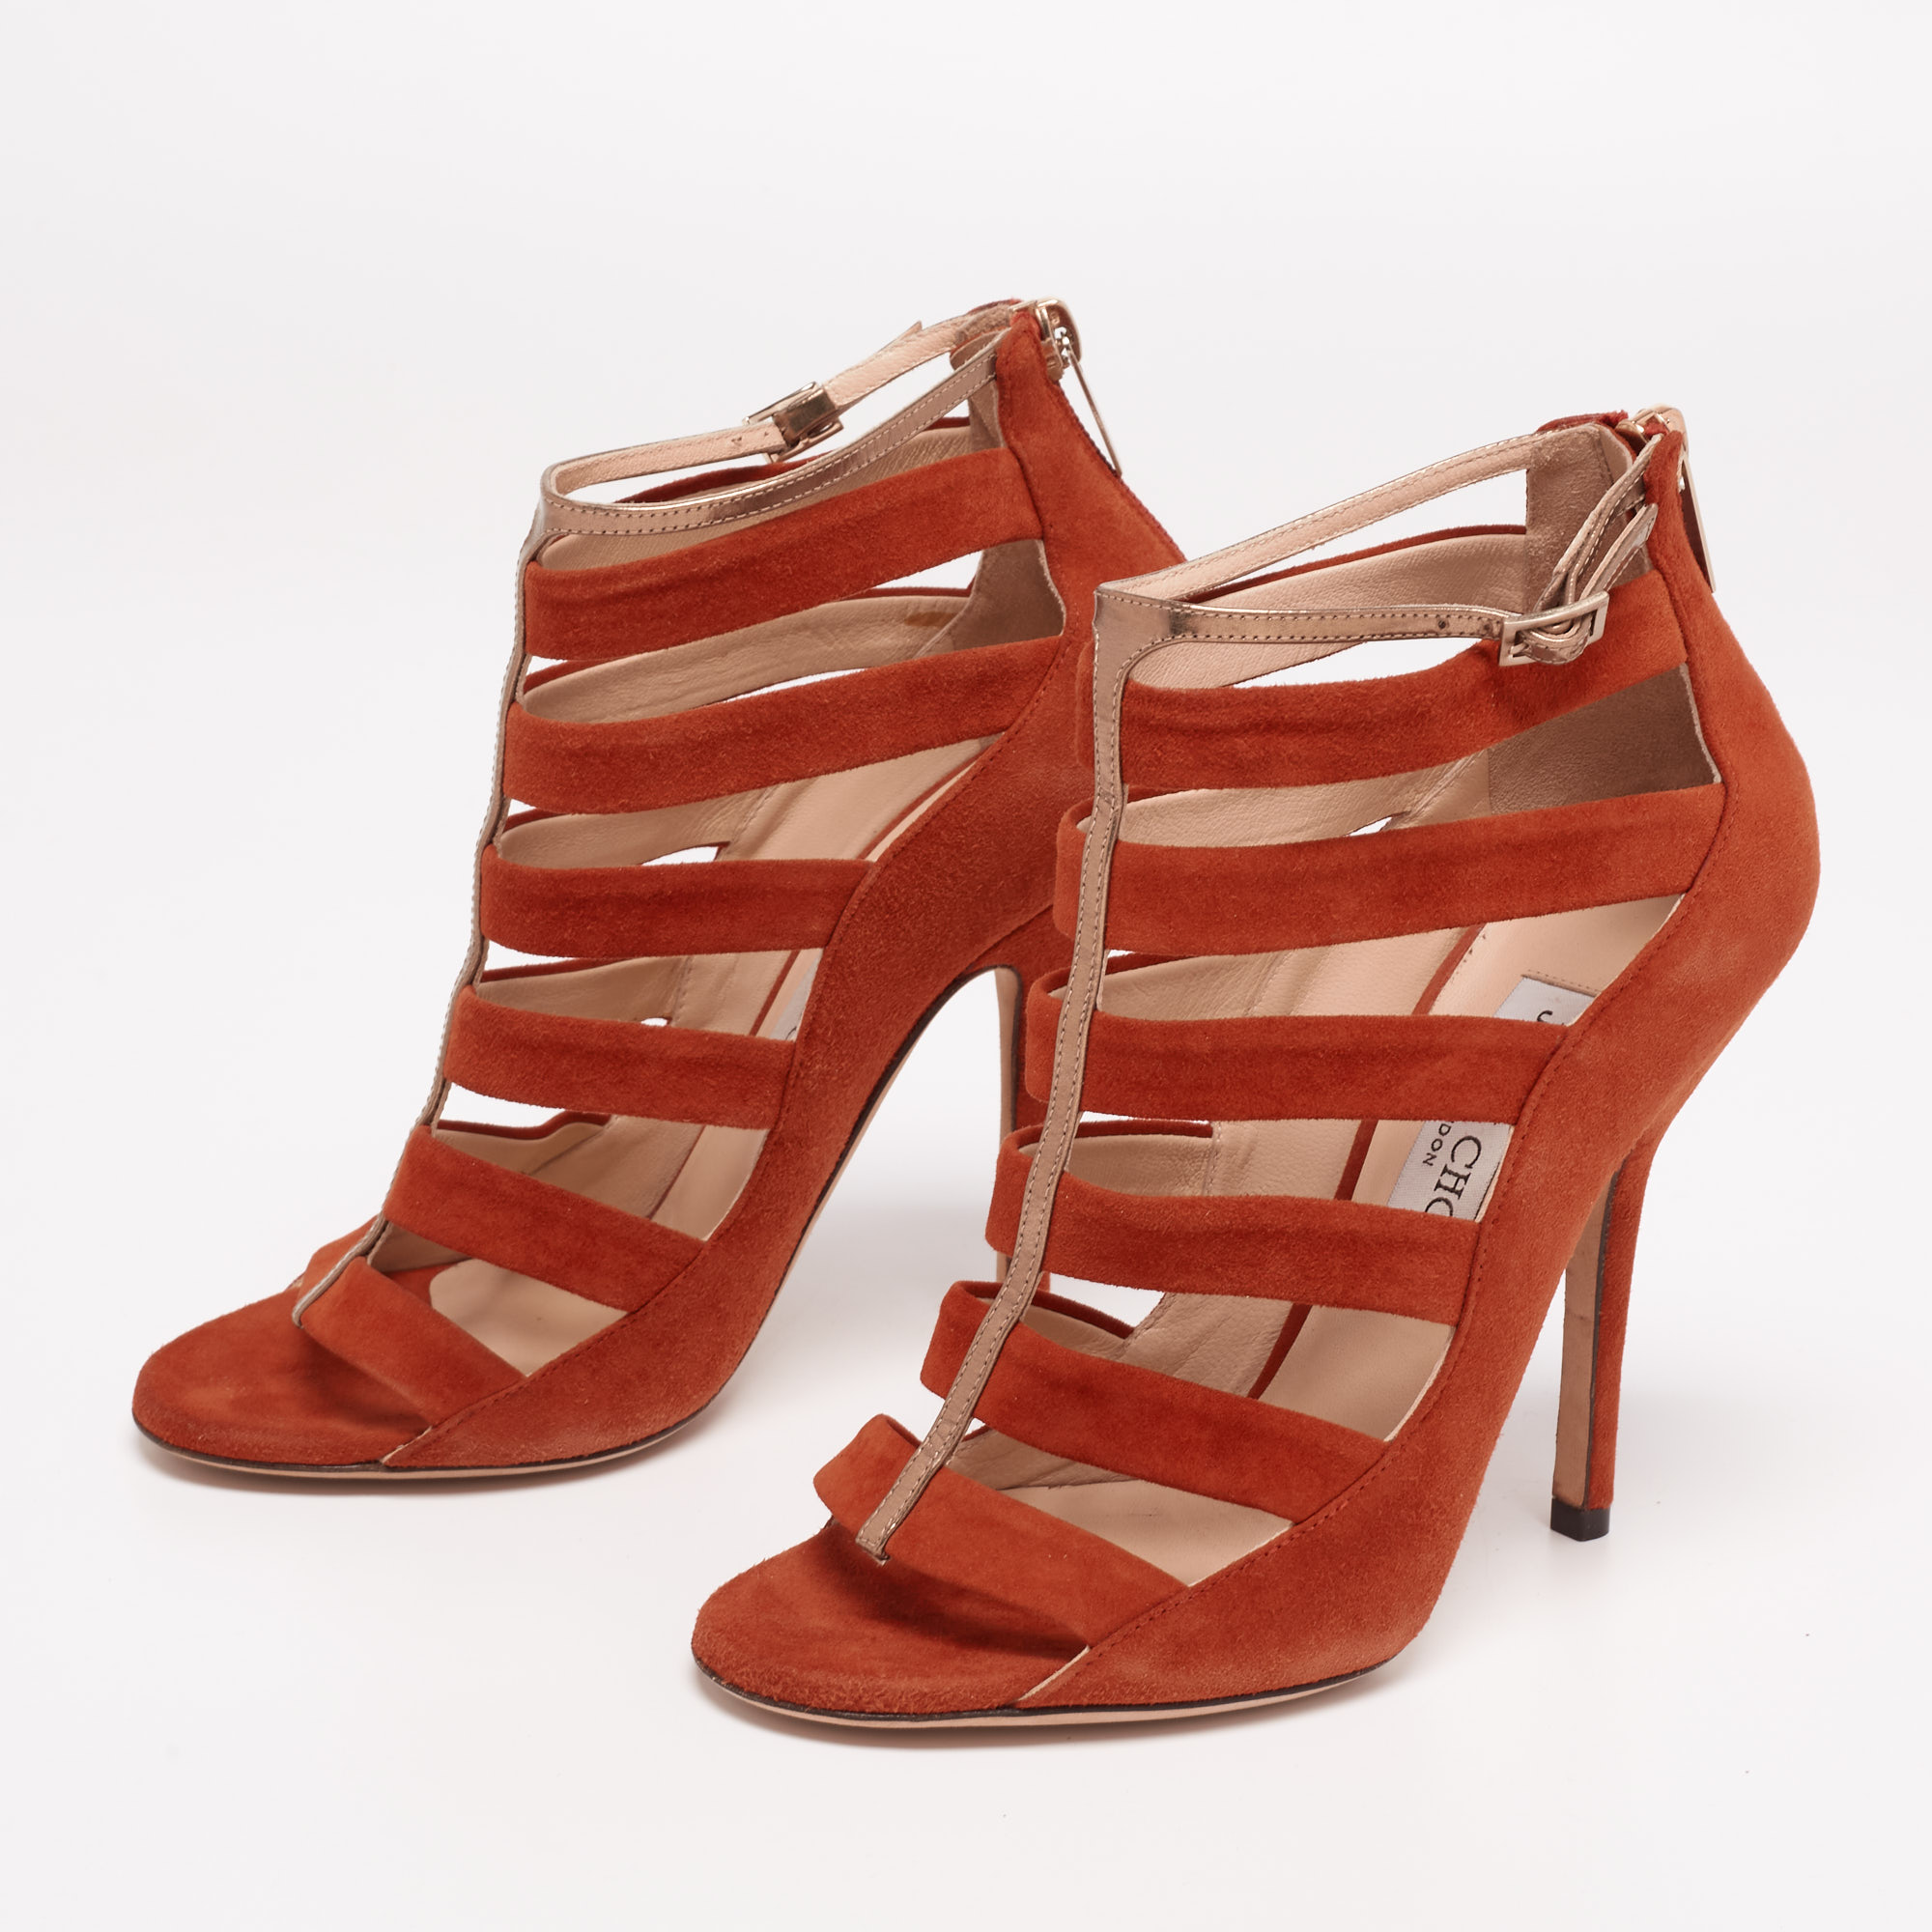 Jimmy Choo Burnt Orange/Gold Suede and Patent Leather Caged Ankle Strap Sandals Size